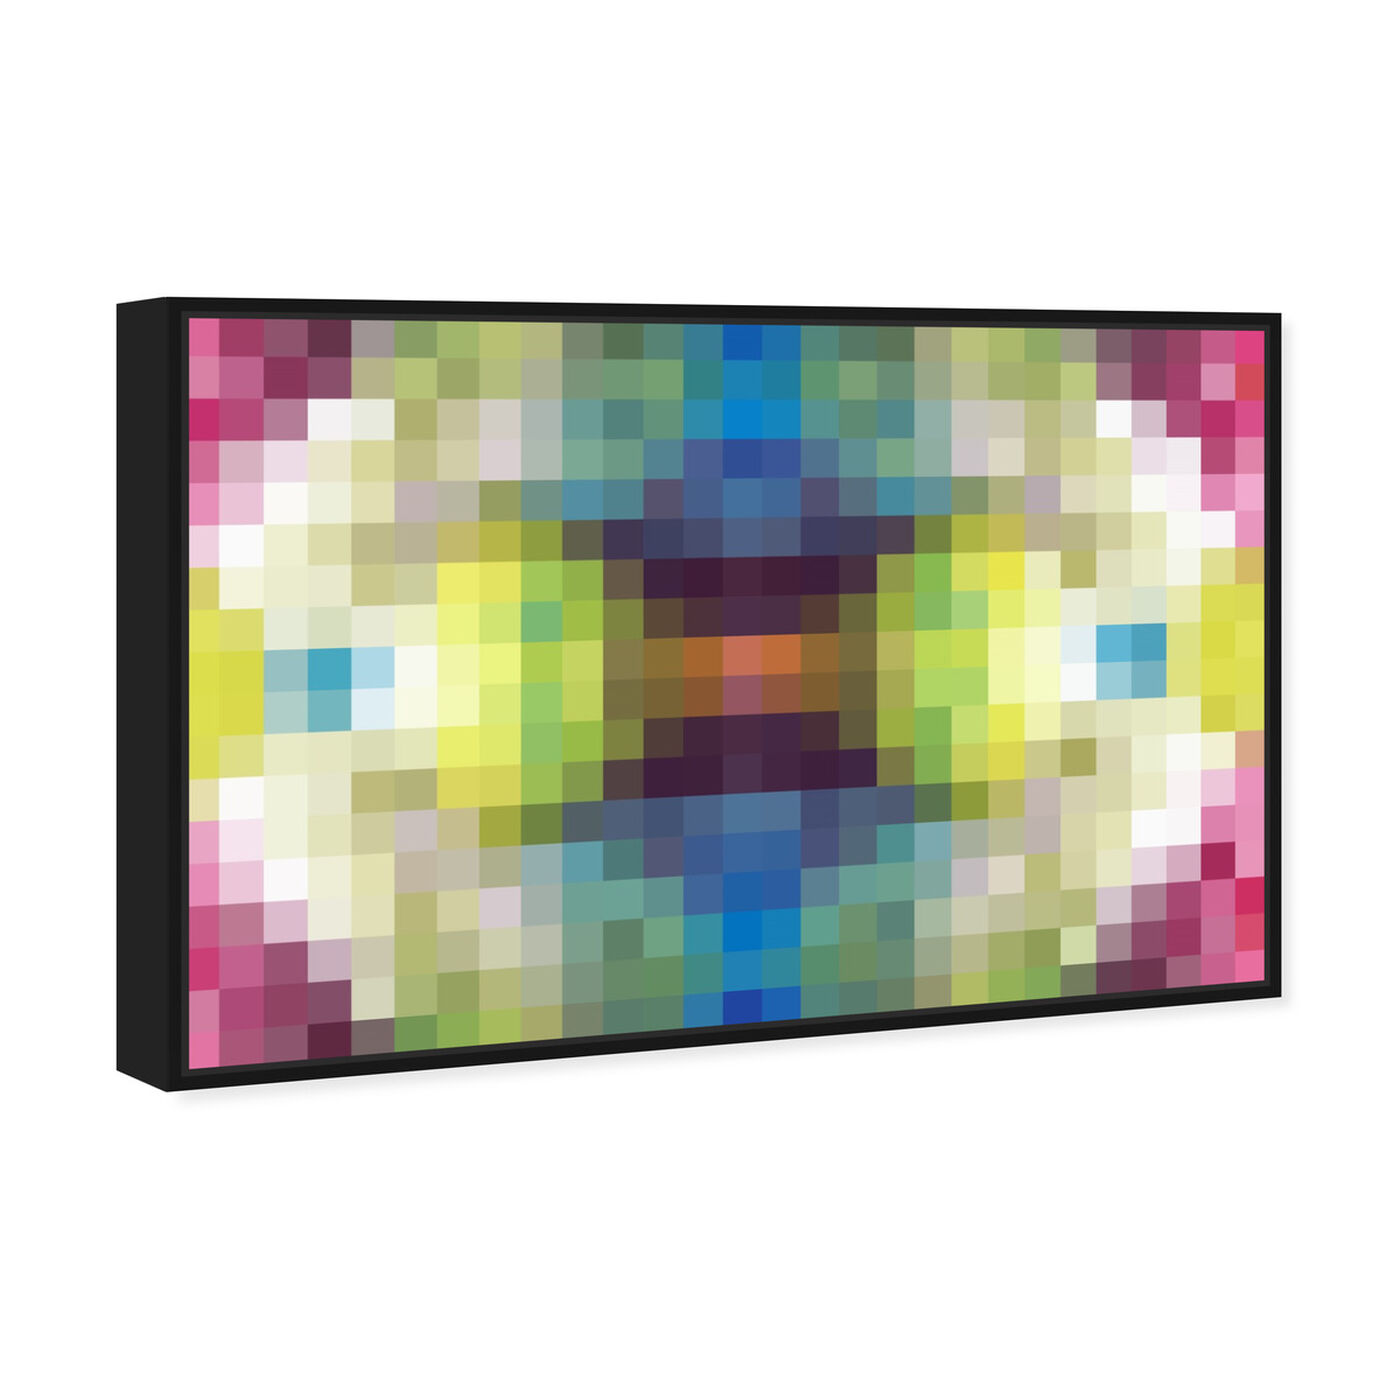 Angled view of Candy Store Pixel featuring abstract and textures art.